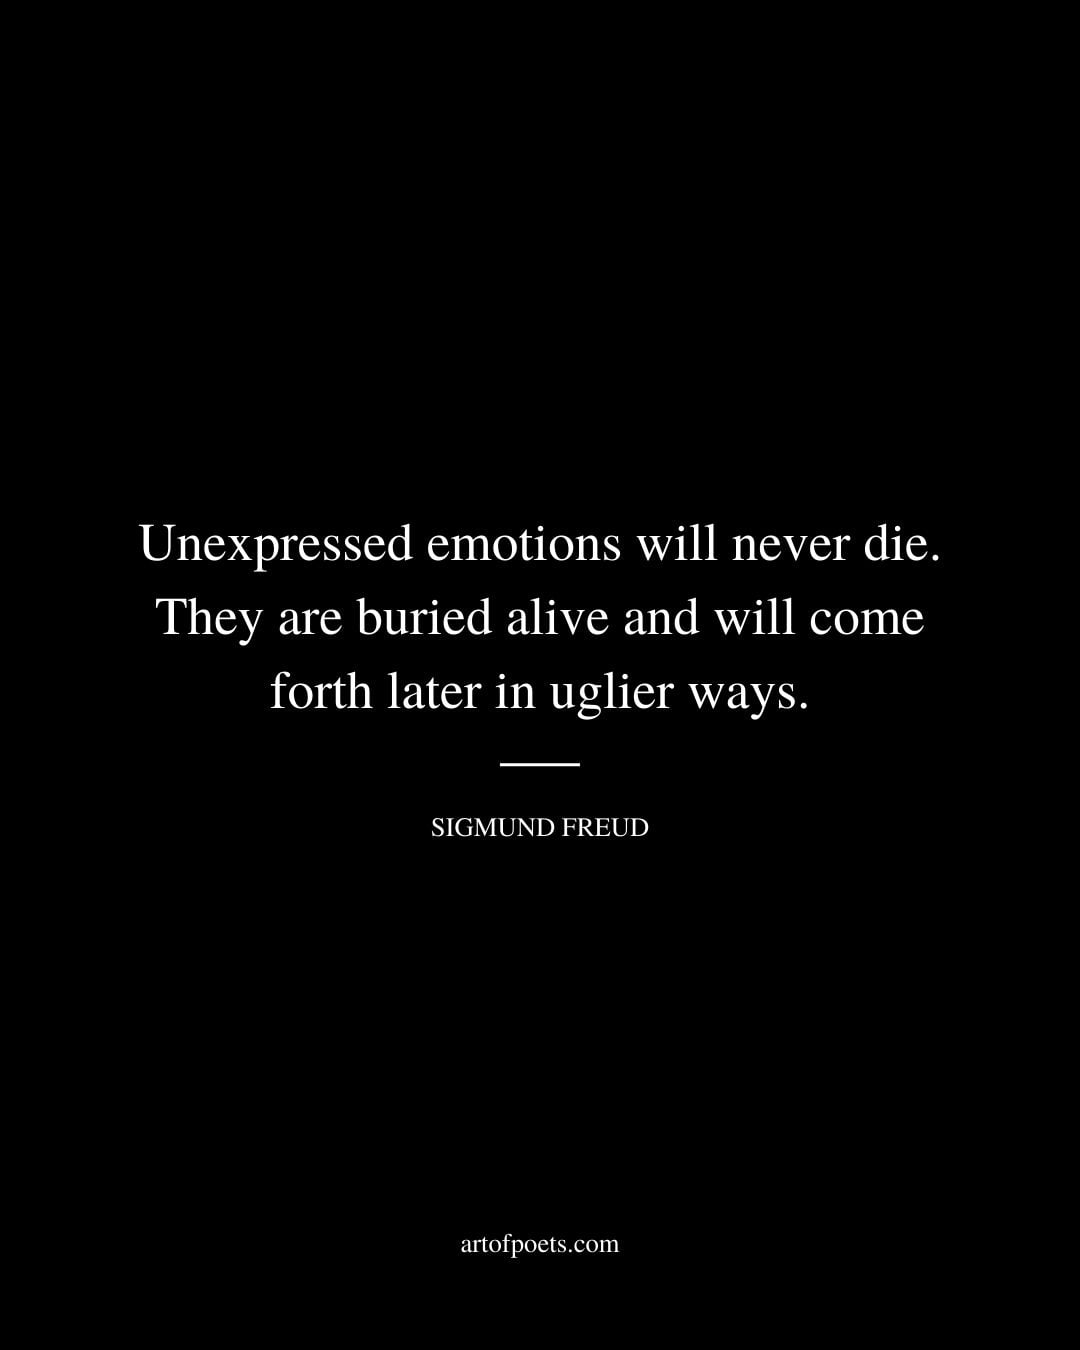 Unexpressed emotions will never die. They are buried alive and will come forth later in uglier ways